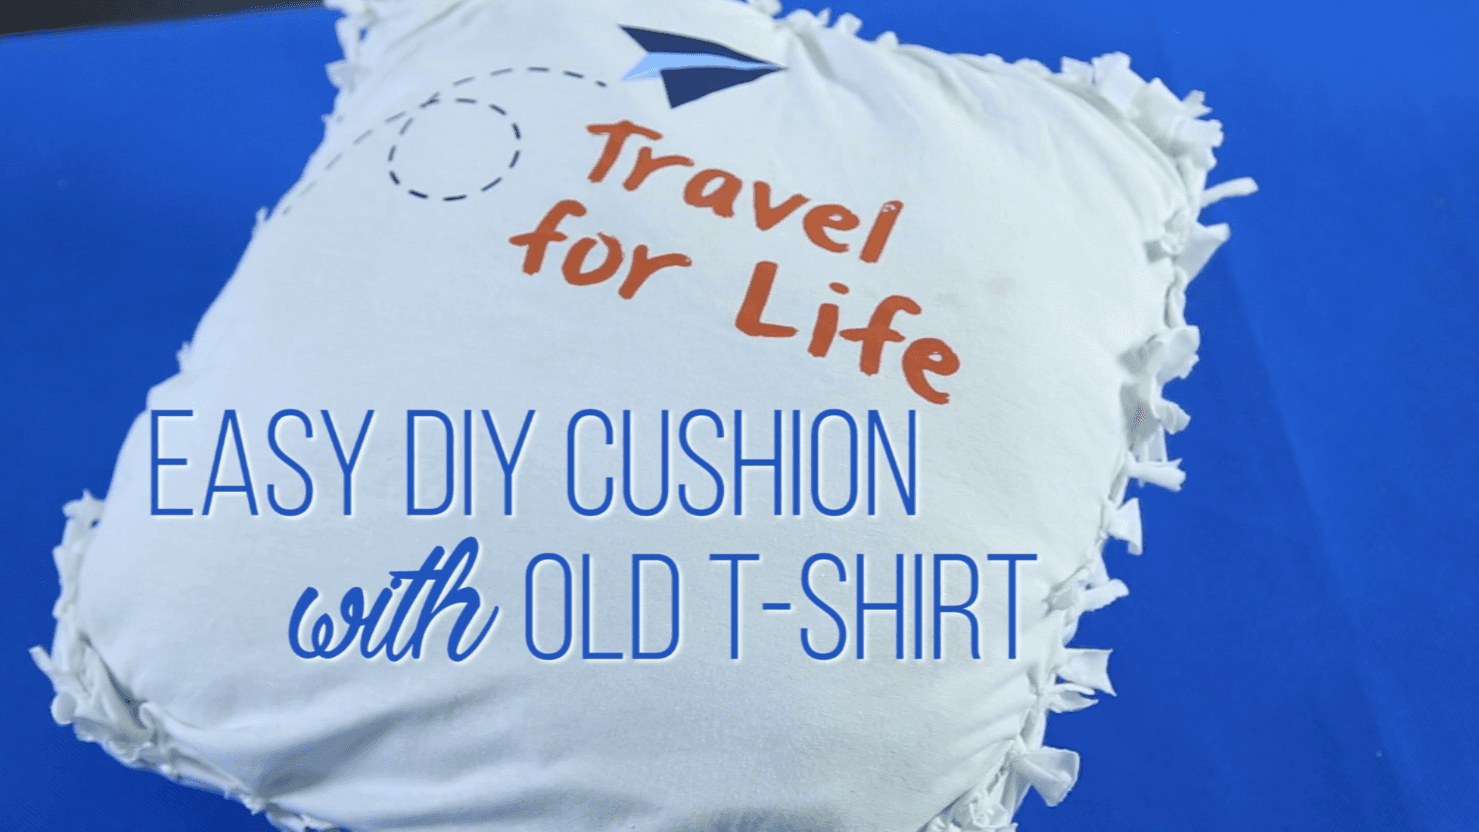 Easy DIY Cushion with Old T-Shirt